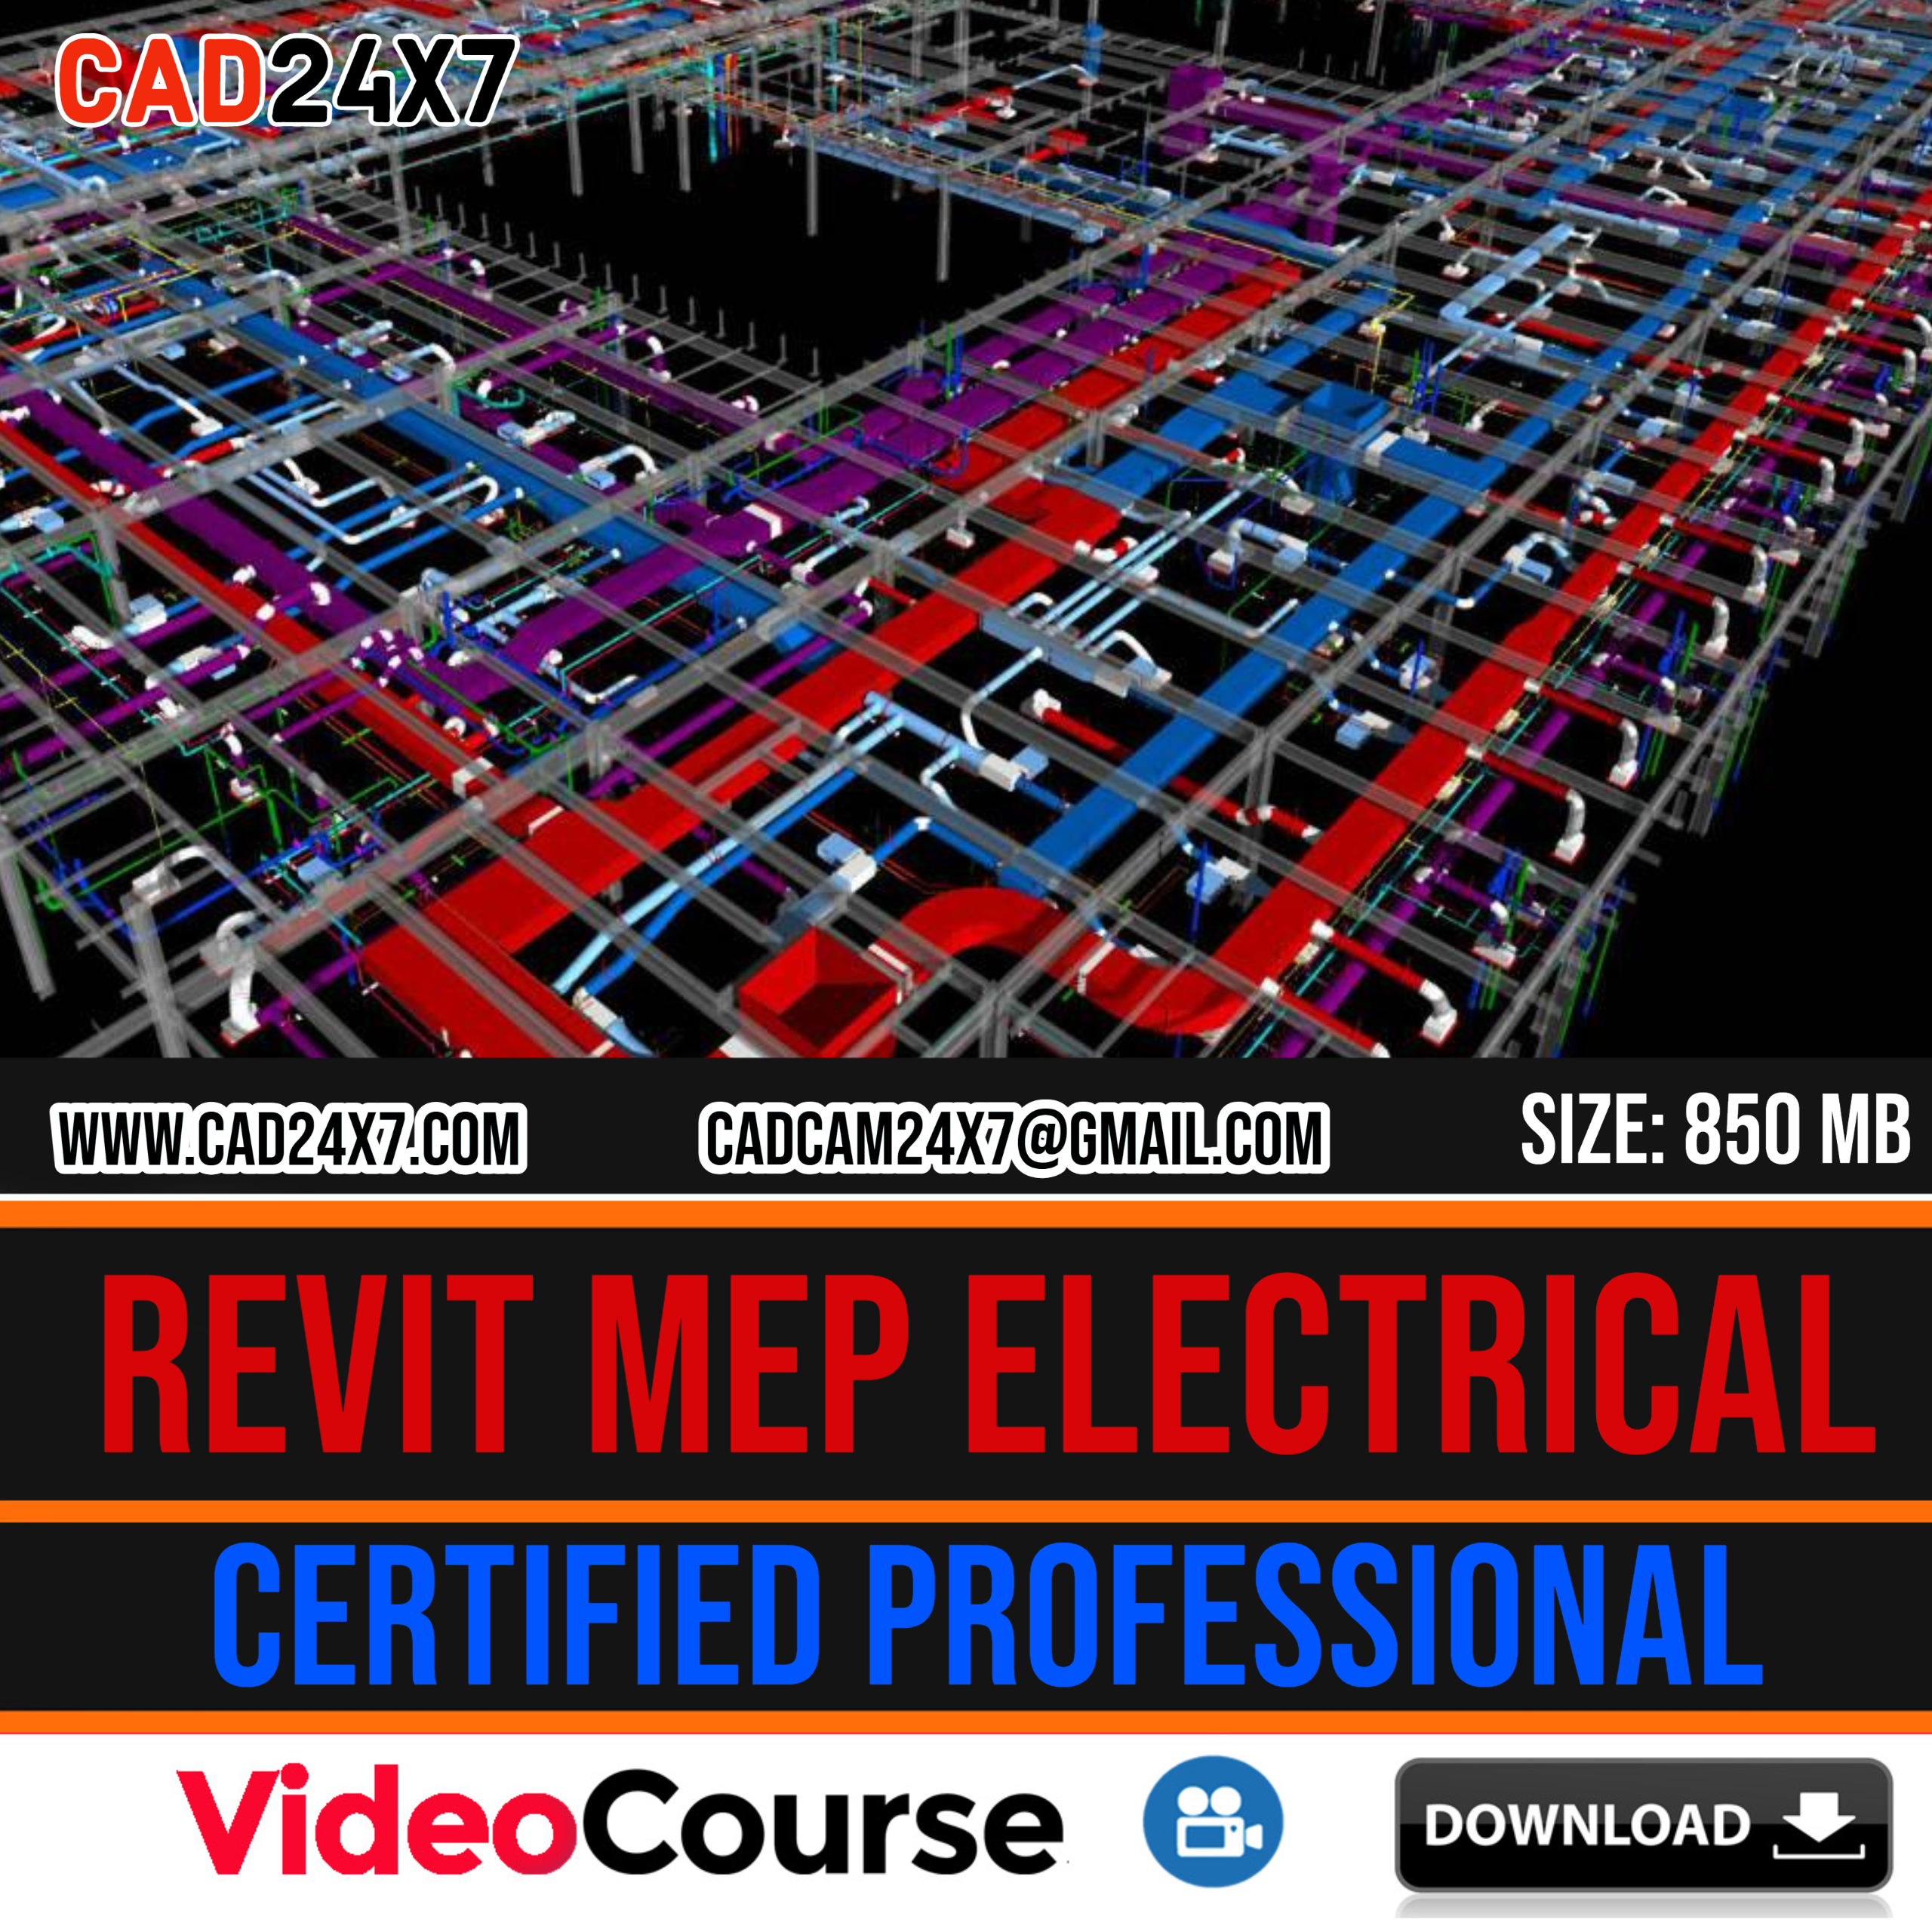 Revit MEP Electrical Certified Professional